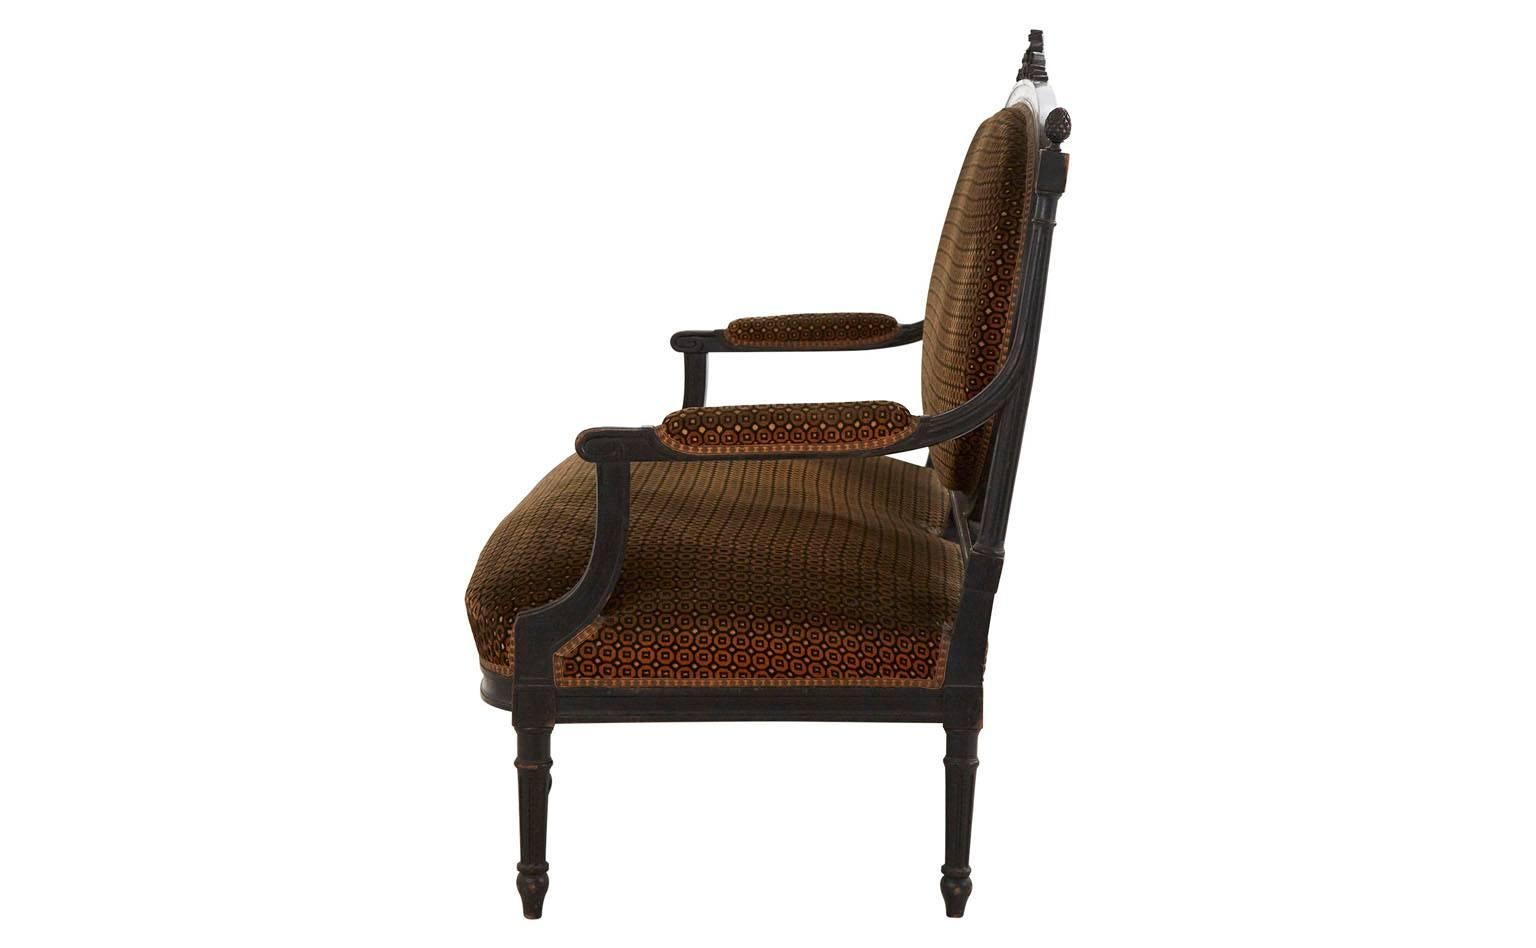 Original brown velvet
Hand-painted ebony wood frame
20th century
France

Dimensions:
overall: 27'W x 63'D x 44'H 
seat height: 16'H
arm height: 25'H